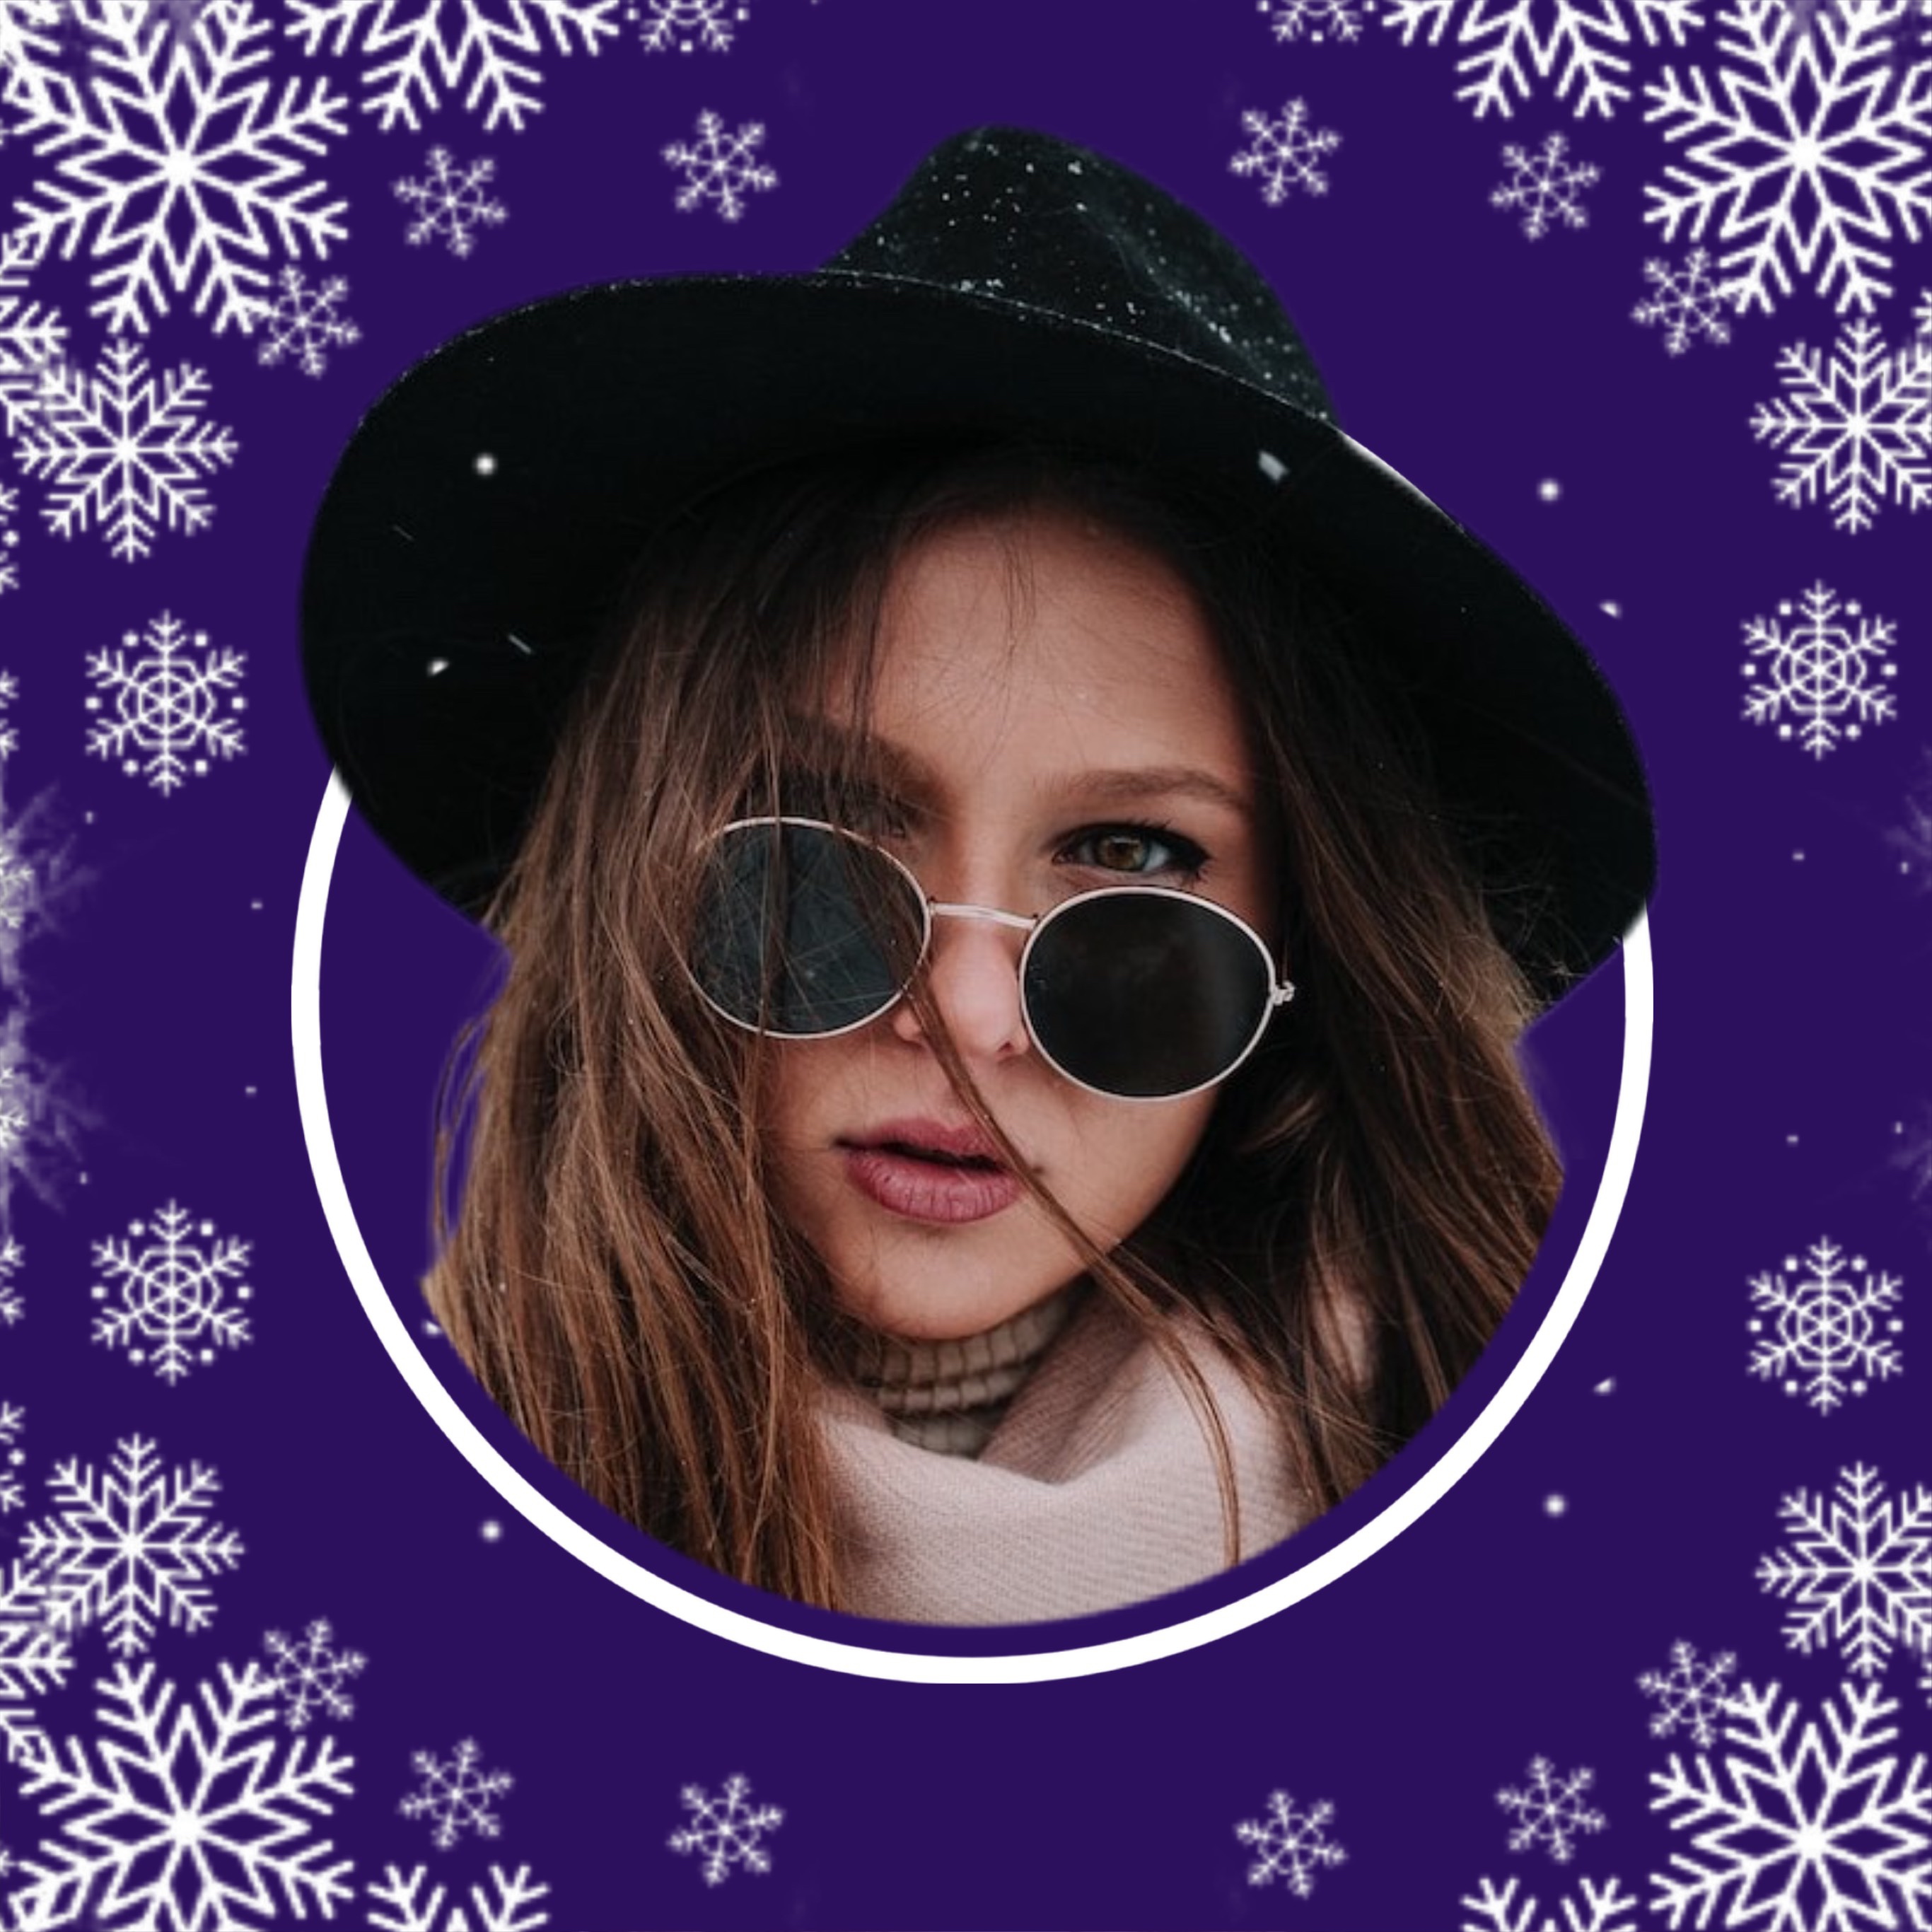 Profile Pic Winter Snow Purple, girl With a Hat And Sunglasses